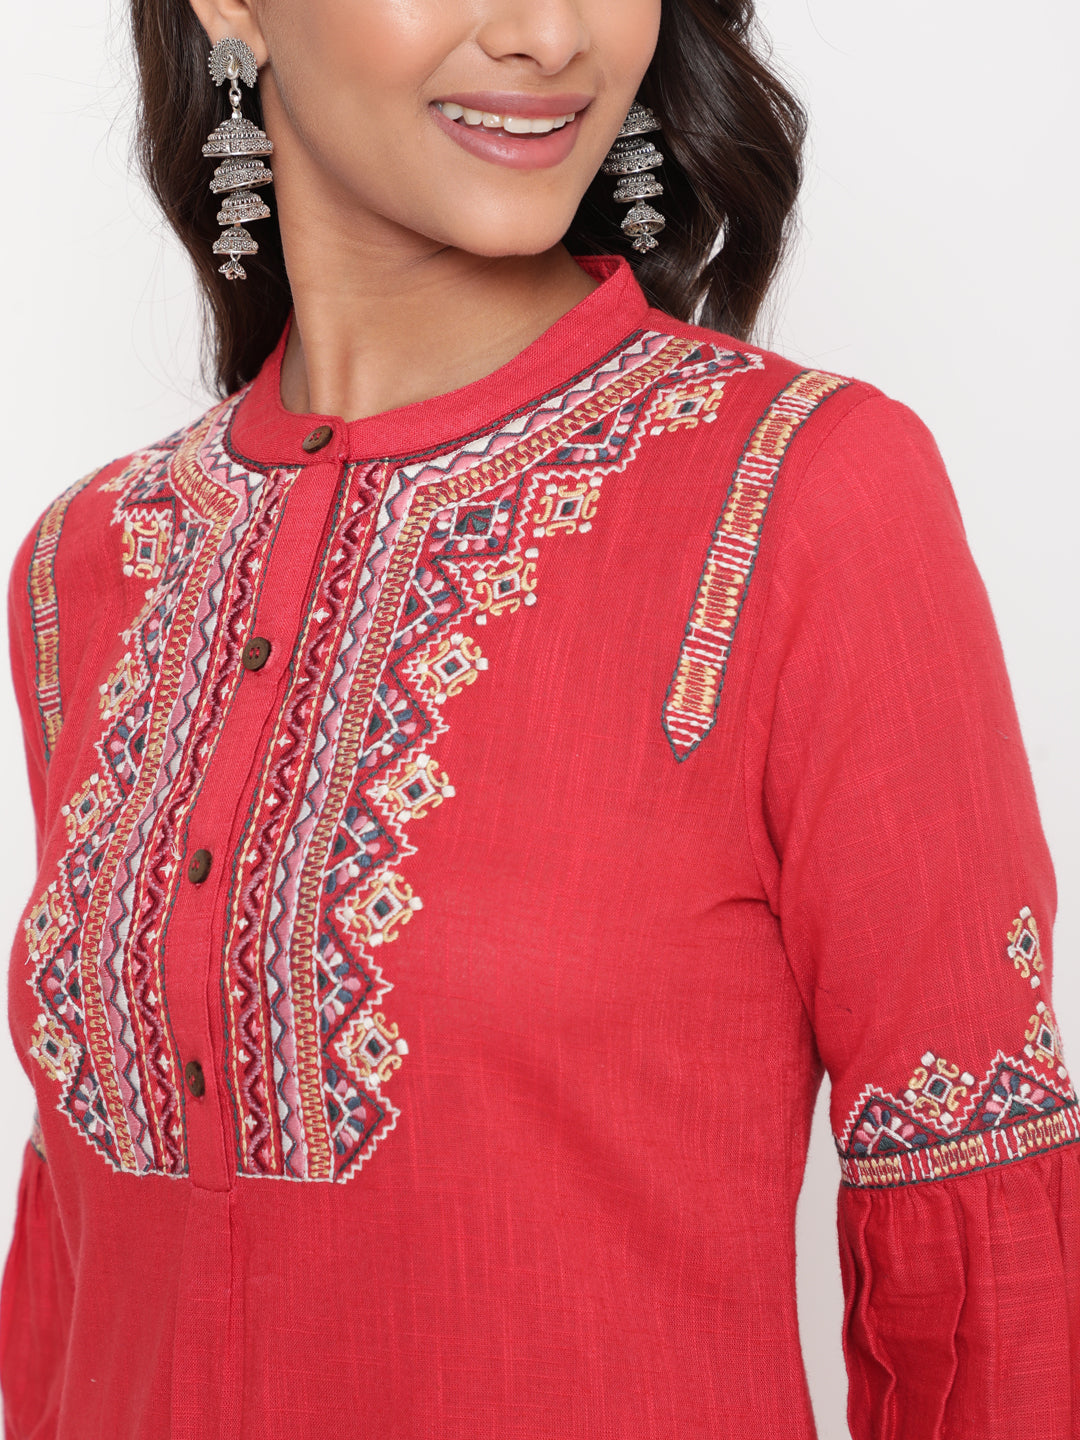 Woman posing in Red Embroidered Designer A Line Kurta